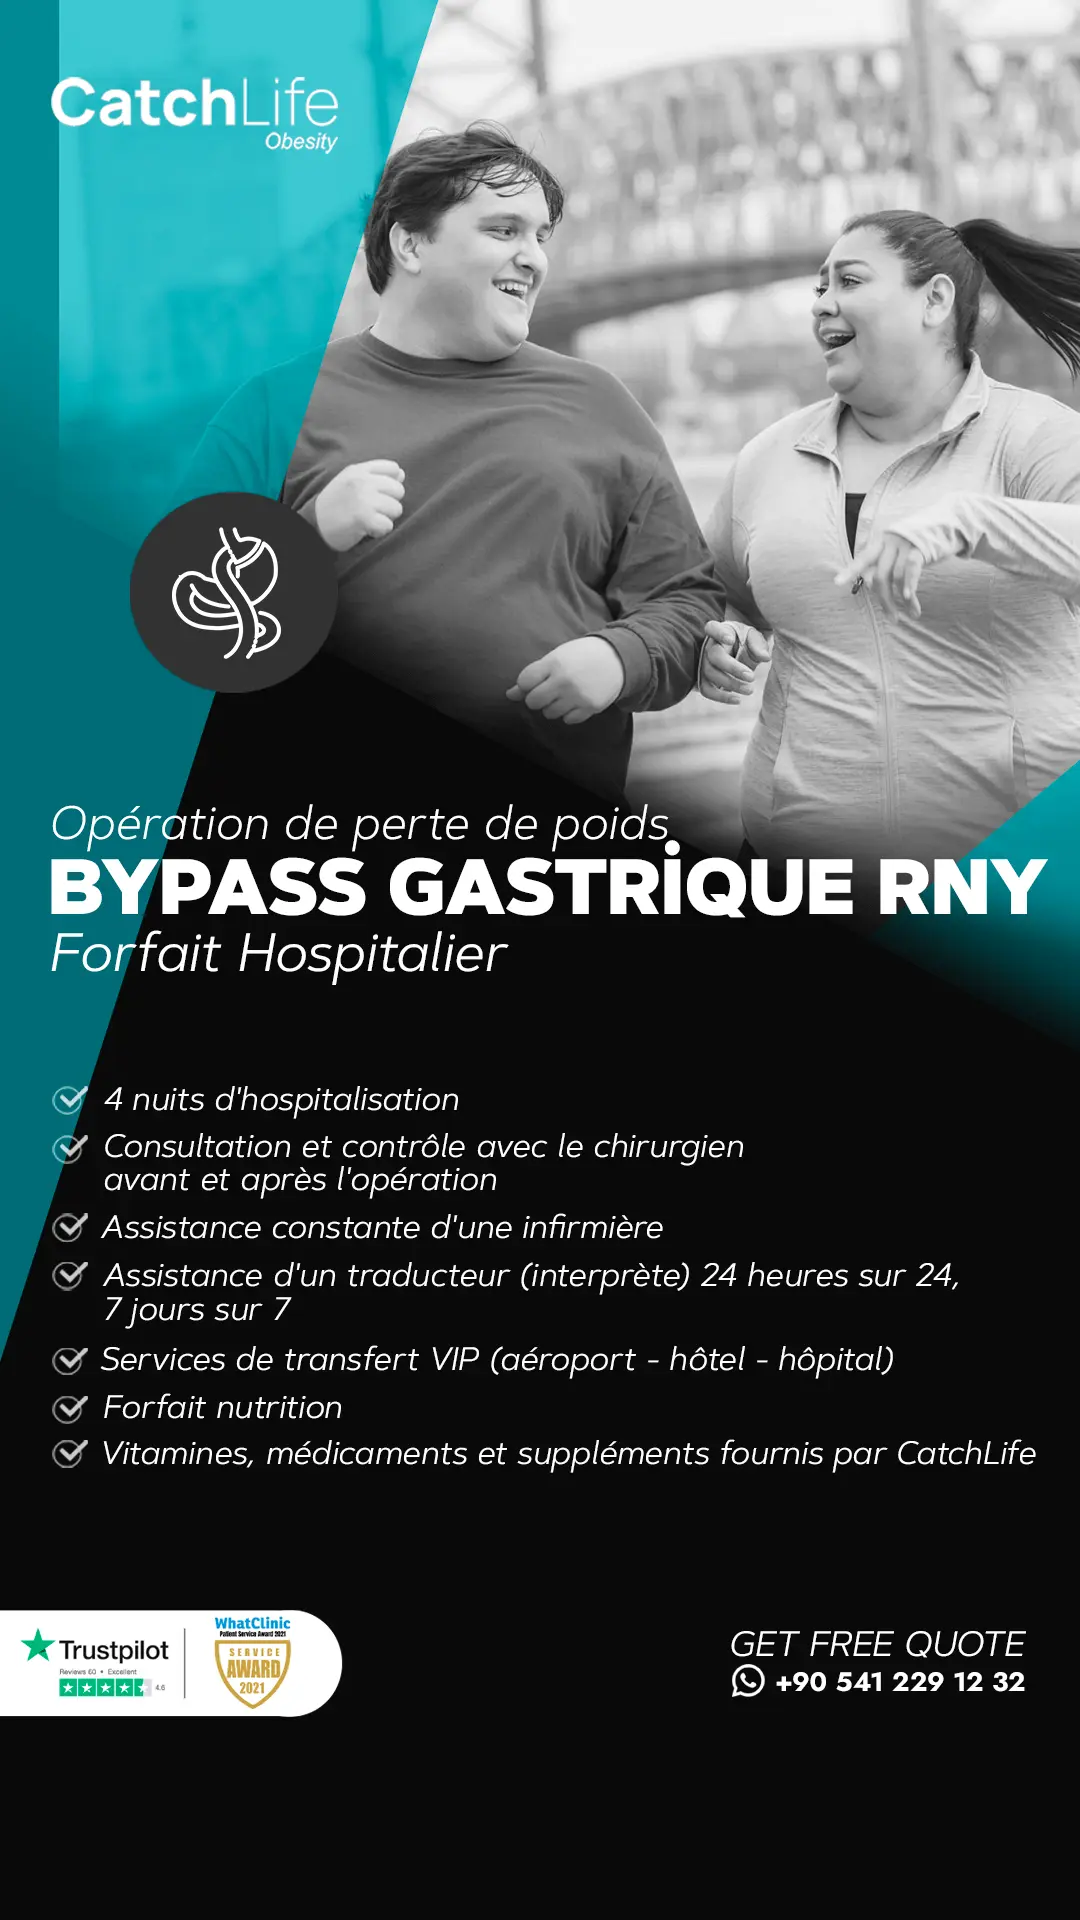 gastric bypass surgery package in turkey